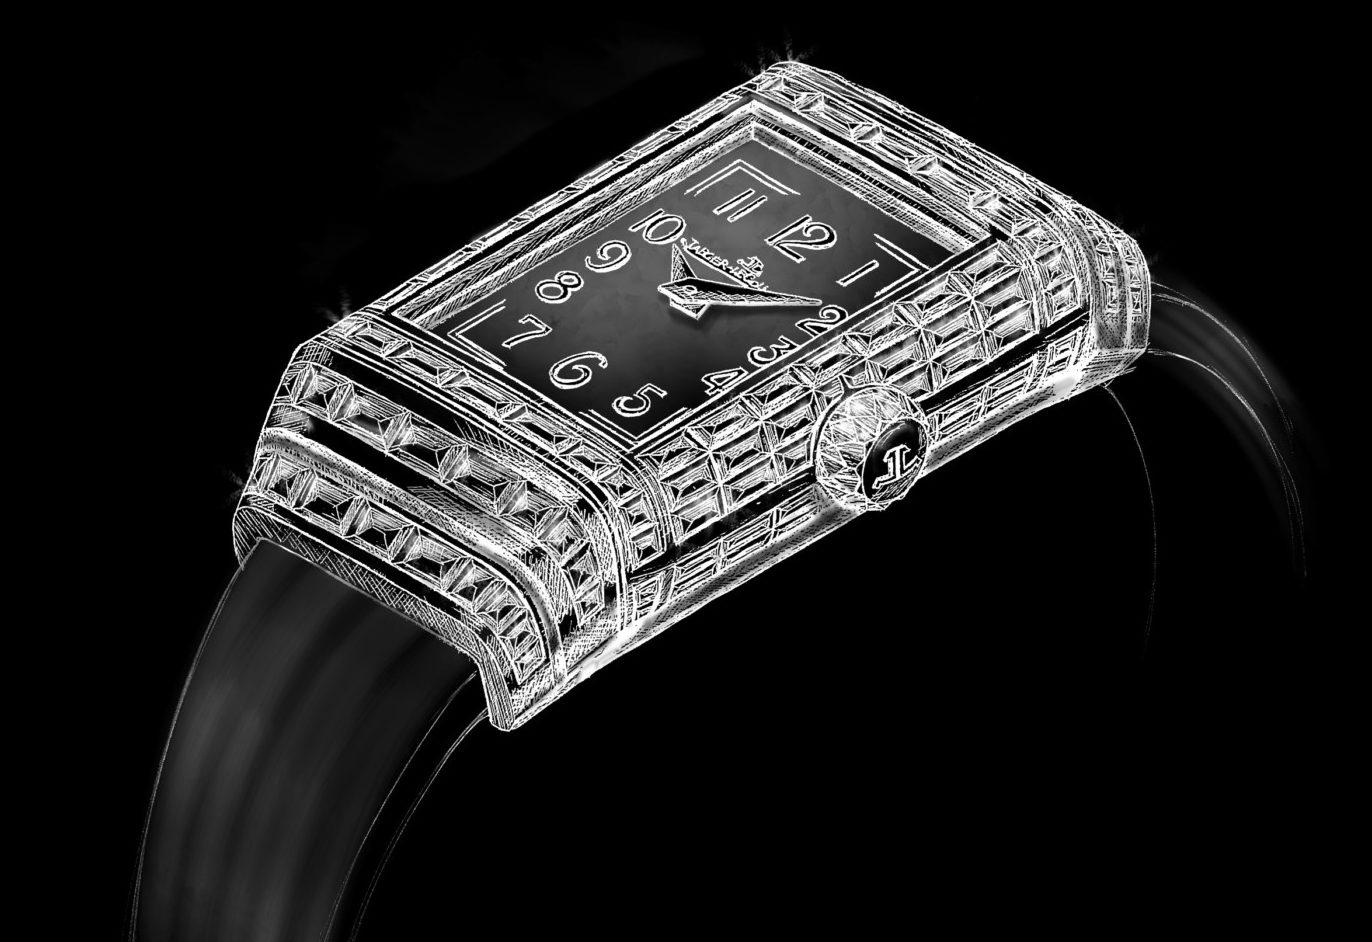 Design of the reverso one high jewelery front e1472659586794